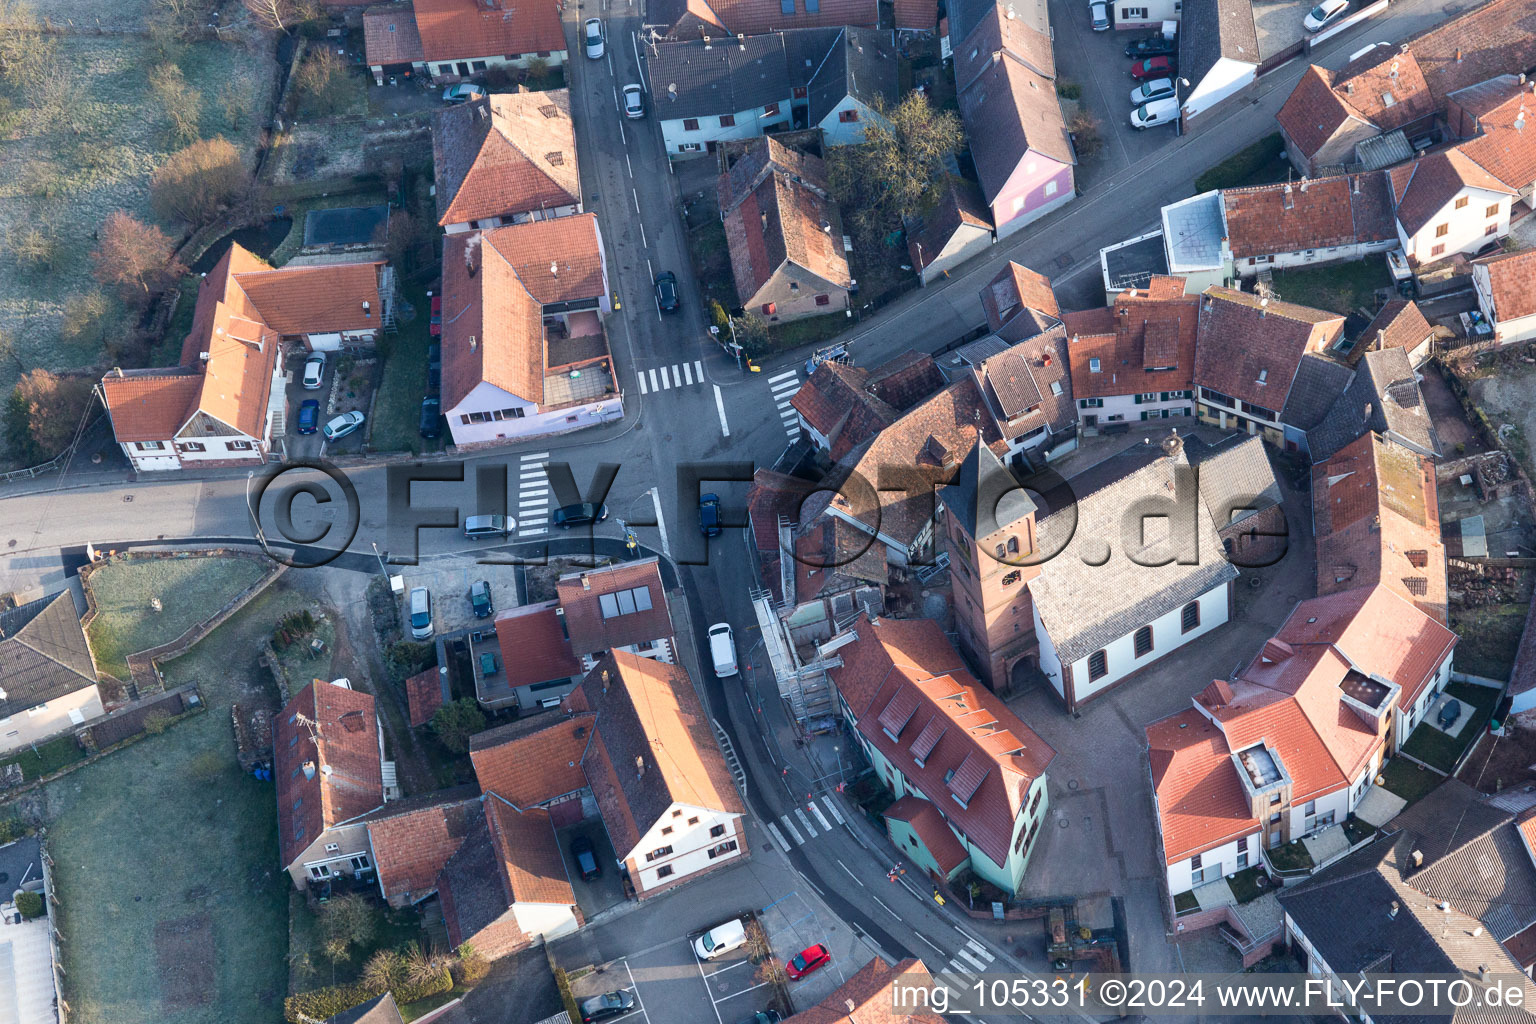 Protestantic Church building in the center of a circle of houses in the village of in Dossenheim-sur-Zinsel in Grand Est, France viewn from the air